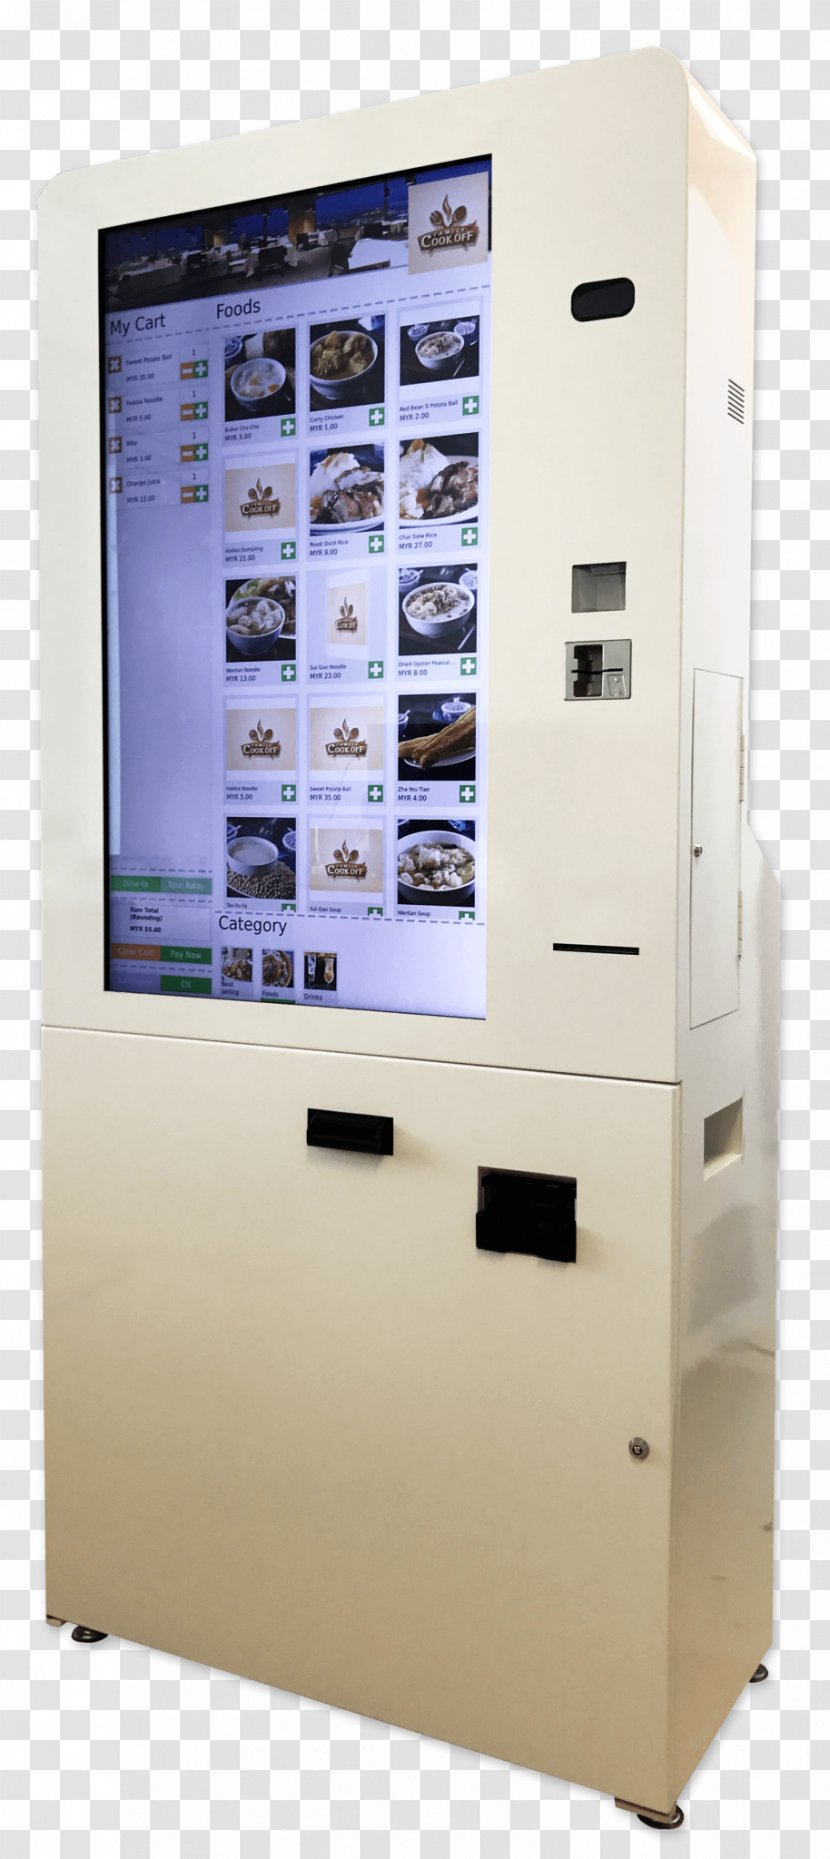 Vending Machines Interactive Kiosks Industry Company - Selfservice - Enclosure Transparent PNG